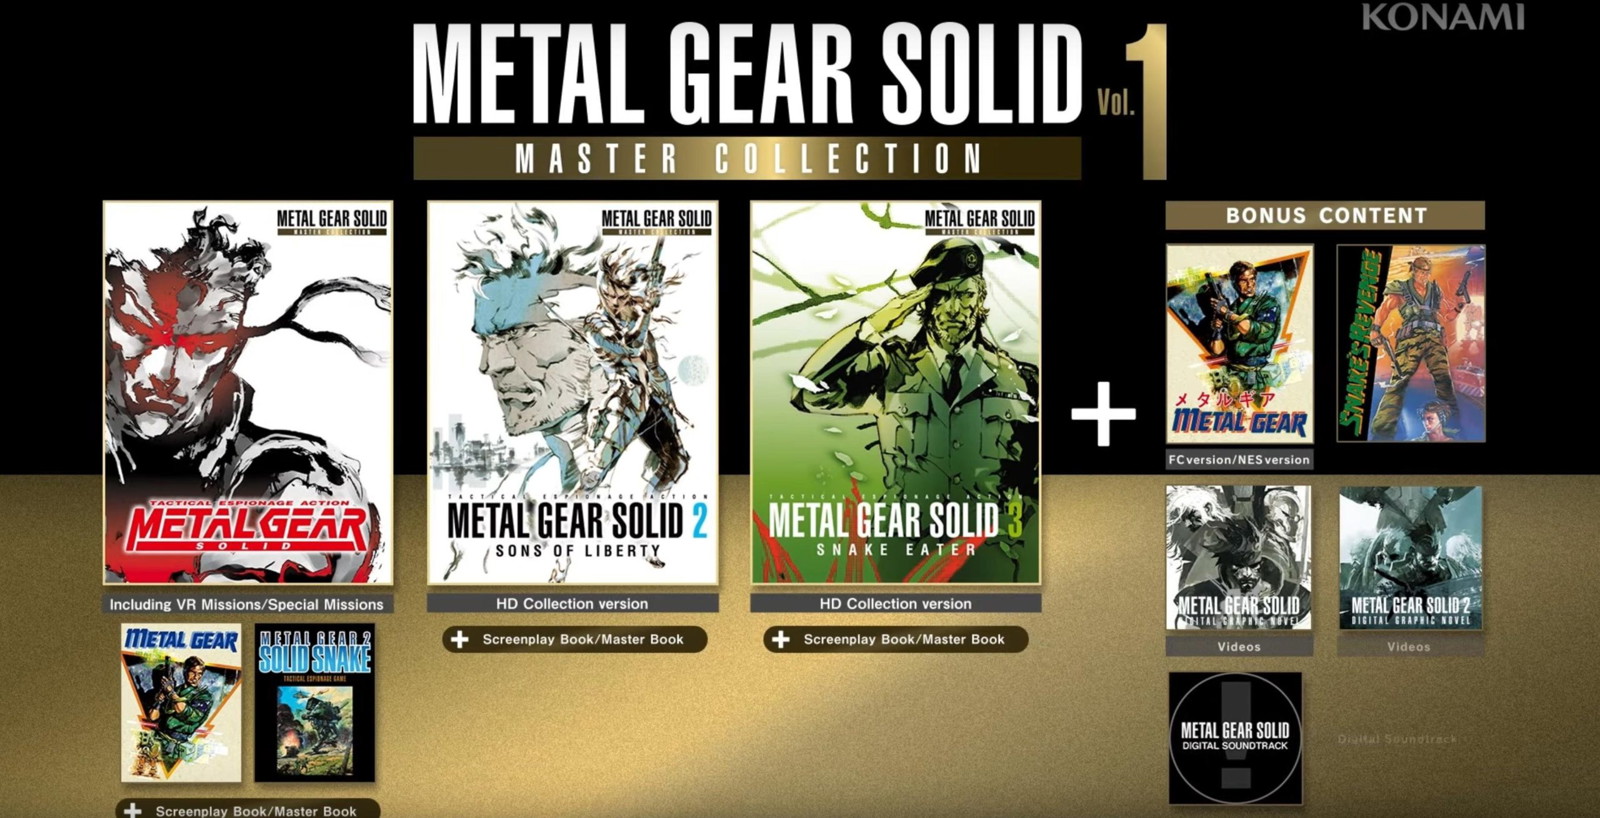 Metal Gear Solid Master Collection Vol. 1 is all set for a 24th October release